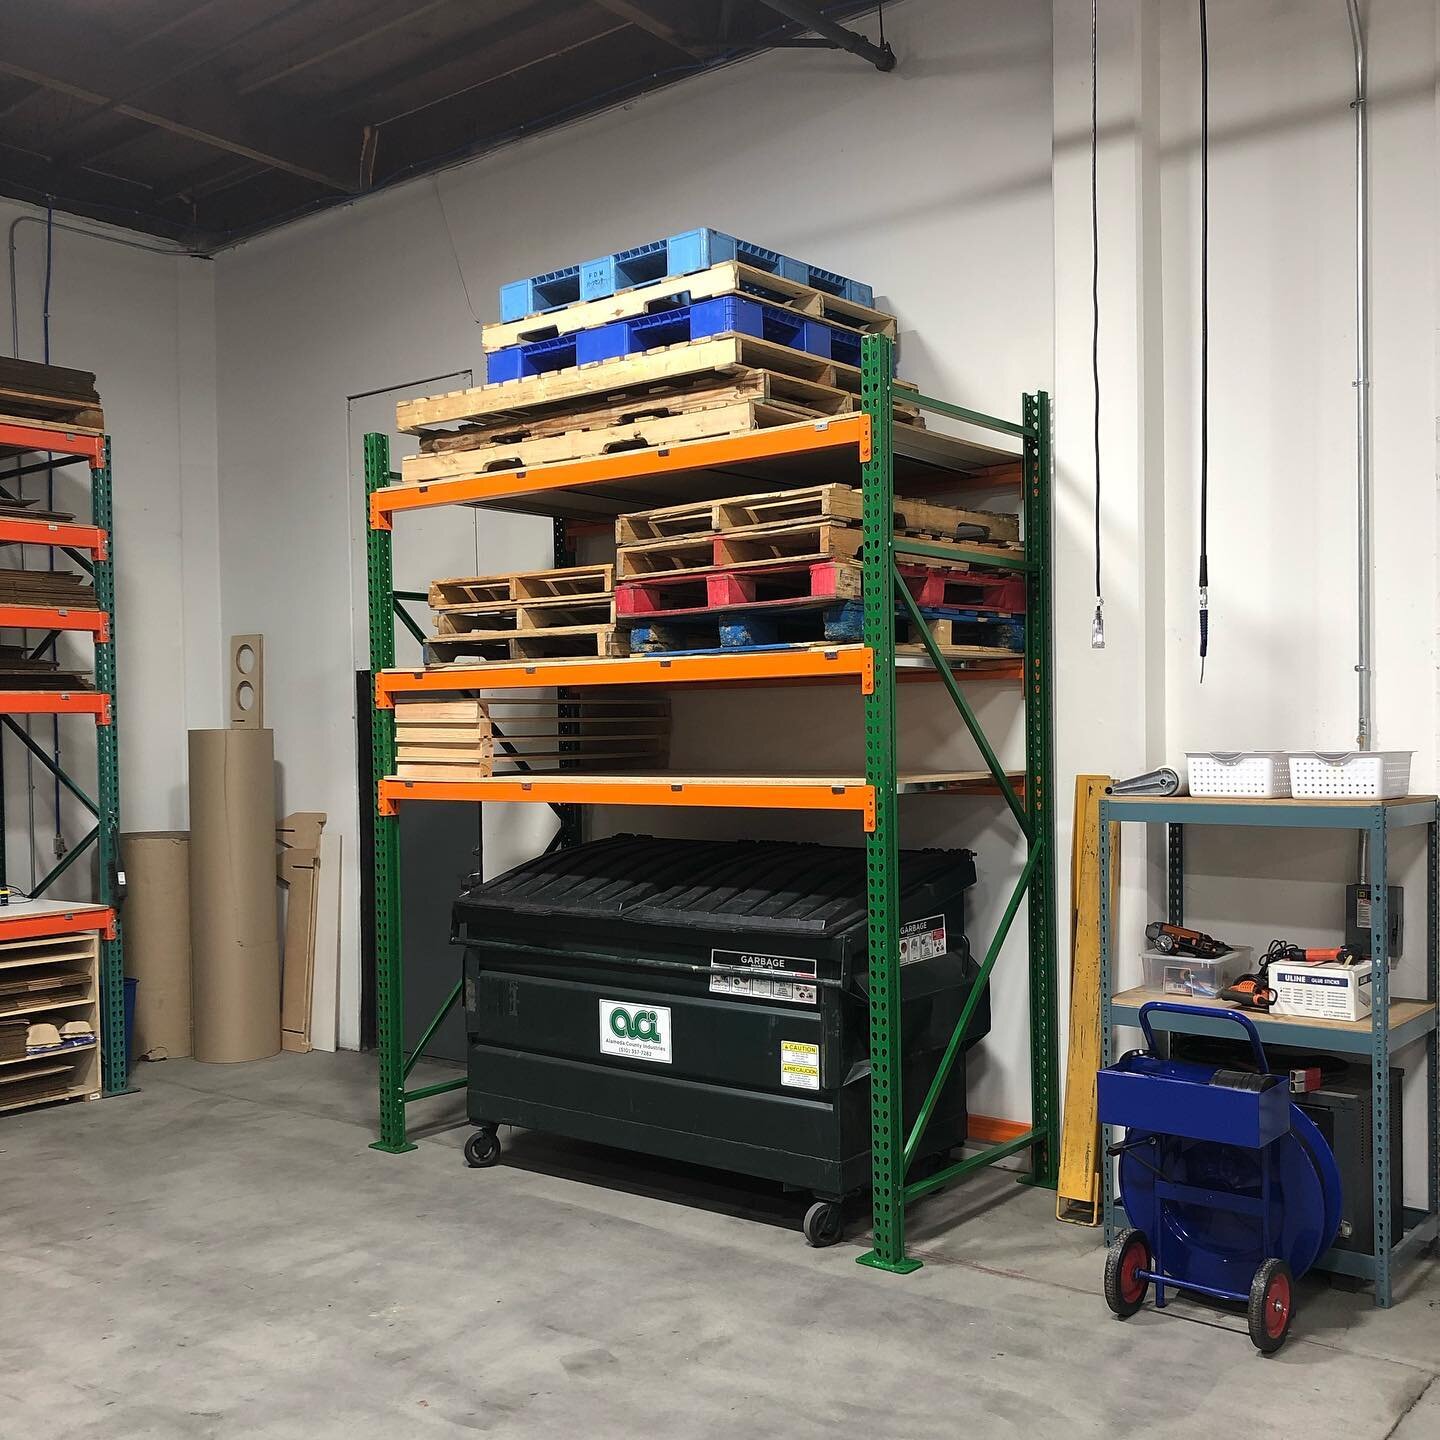 I&rsquo;m super proud of our new dumpster and pallet storage area. Is this a handsome little setup or what??? #organizing #mariekondomethod